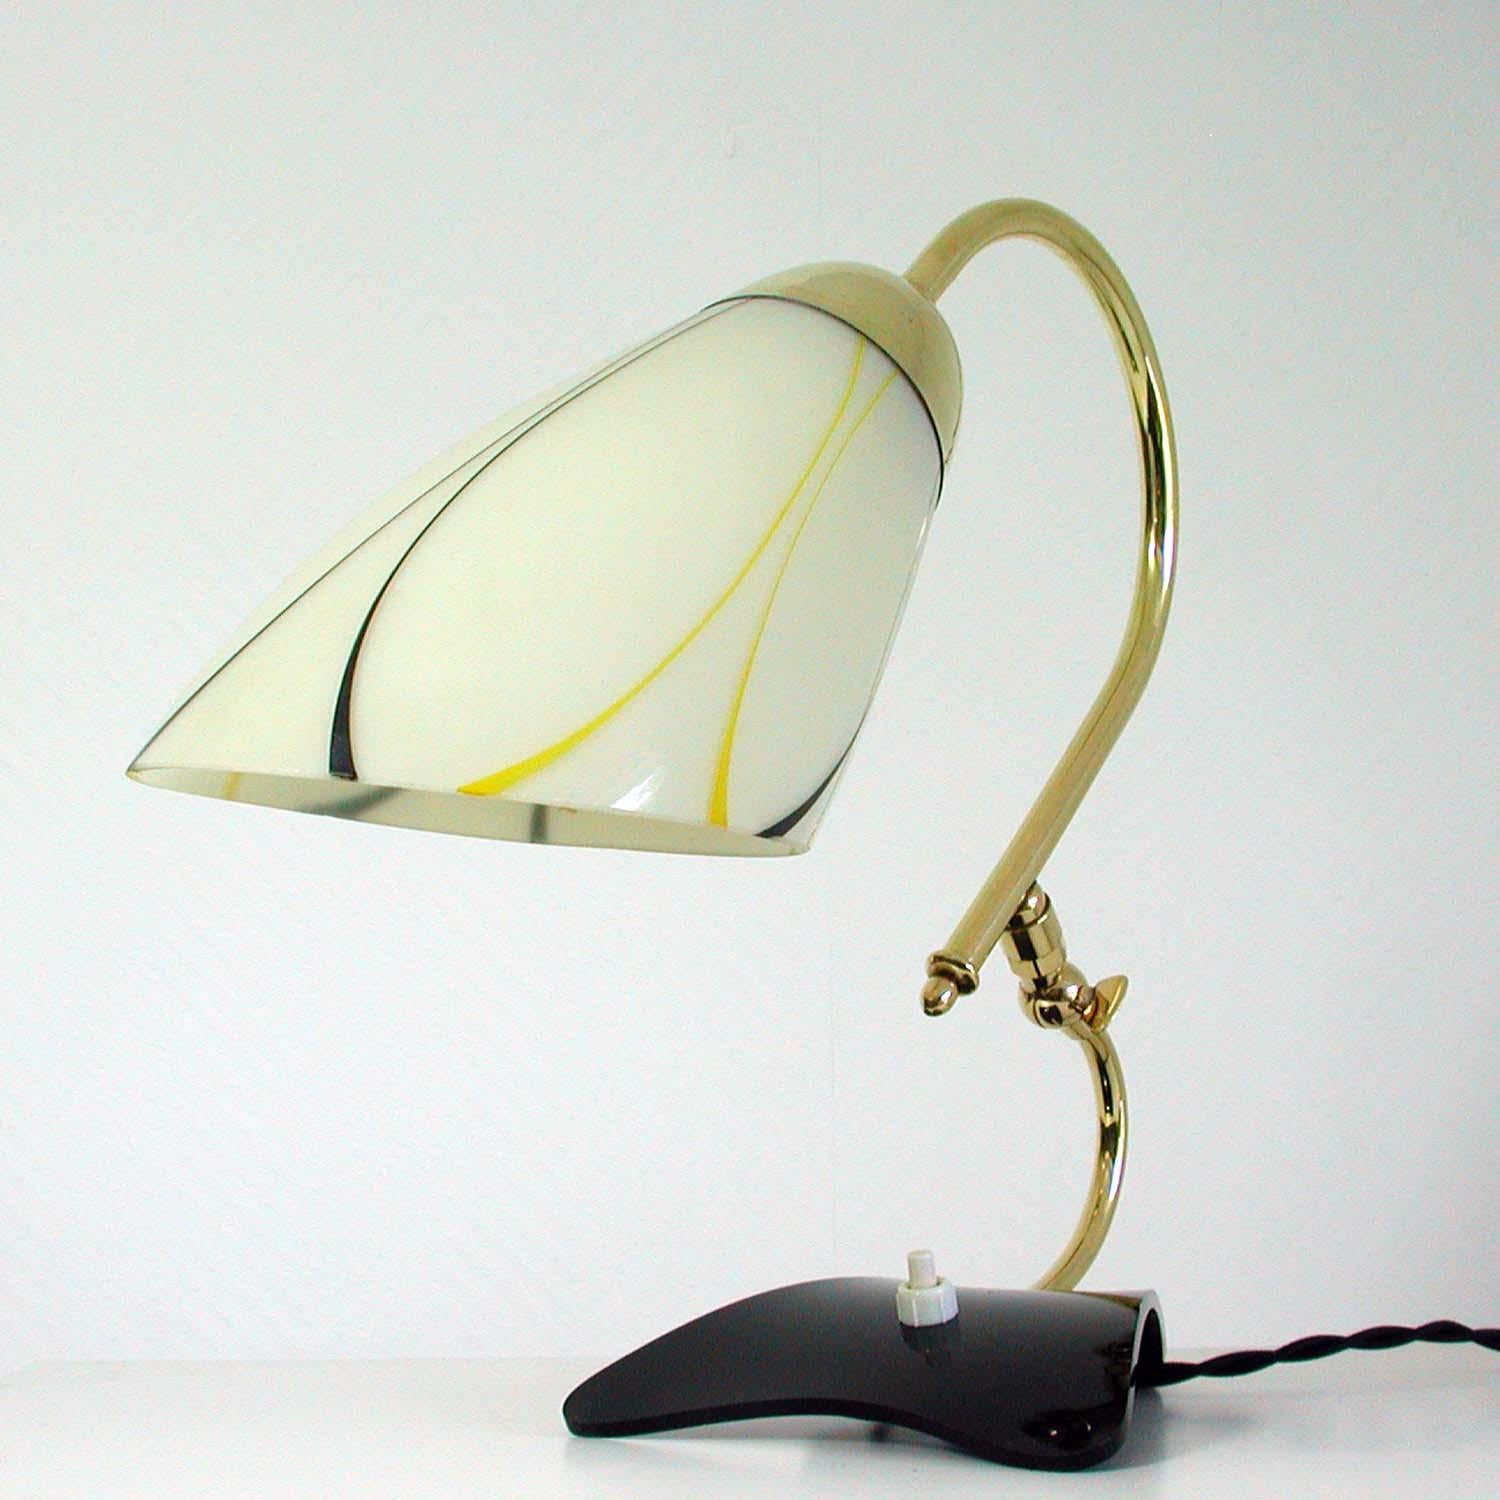 German Midcentury Adjustable Yellow, Black and White Table Lamp, 1950s For Sale 6